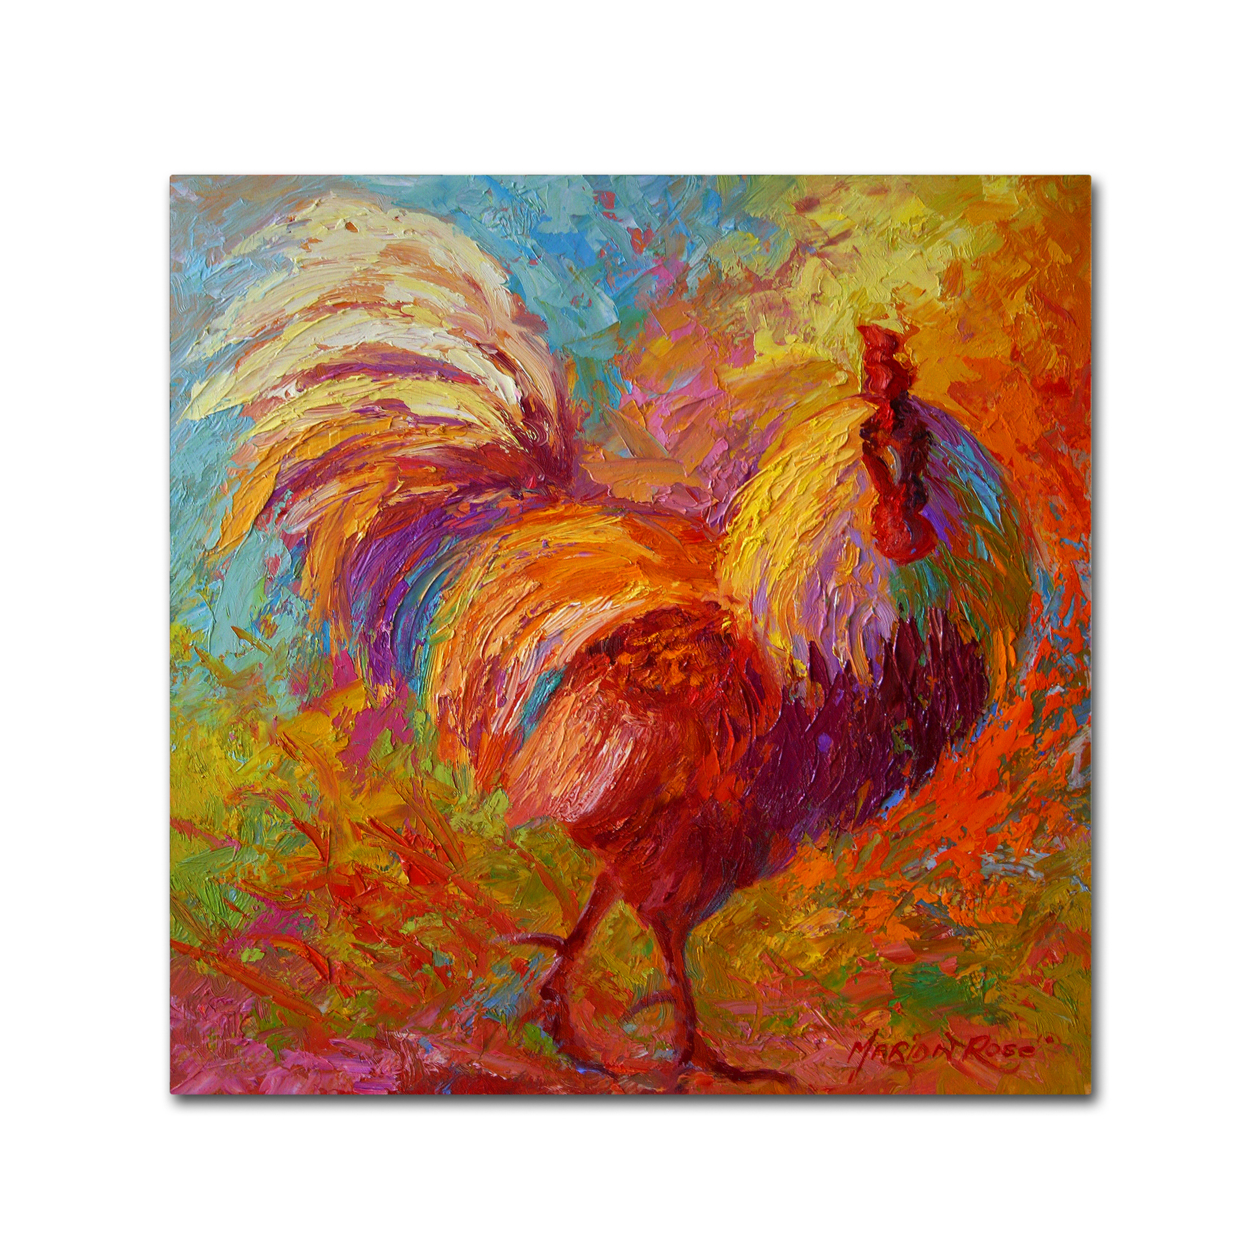 Marion Rose 'Rooster 6' Ready To Hang Canvas Art 35 X 35 Inches Made In USA